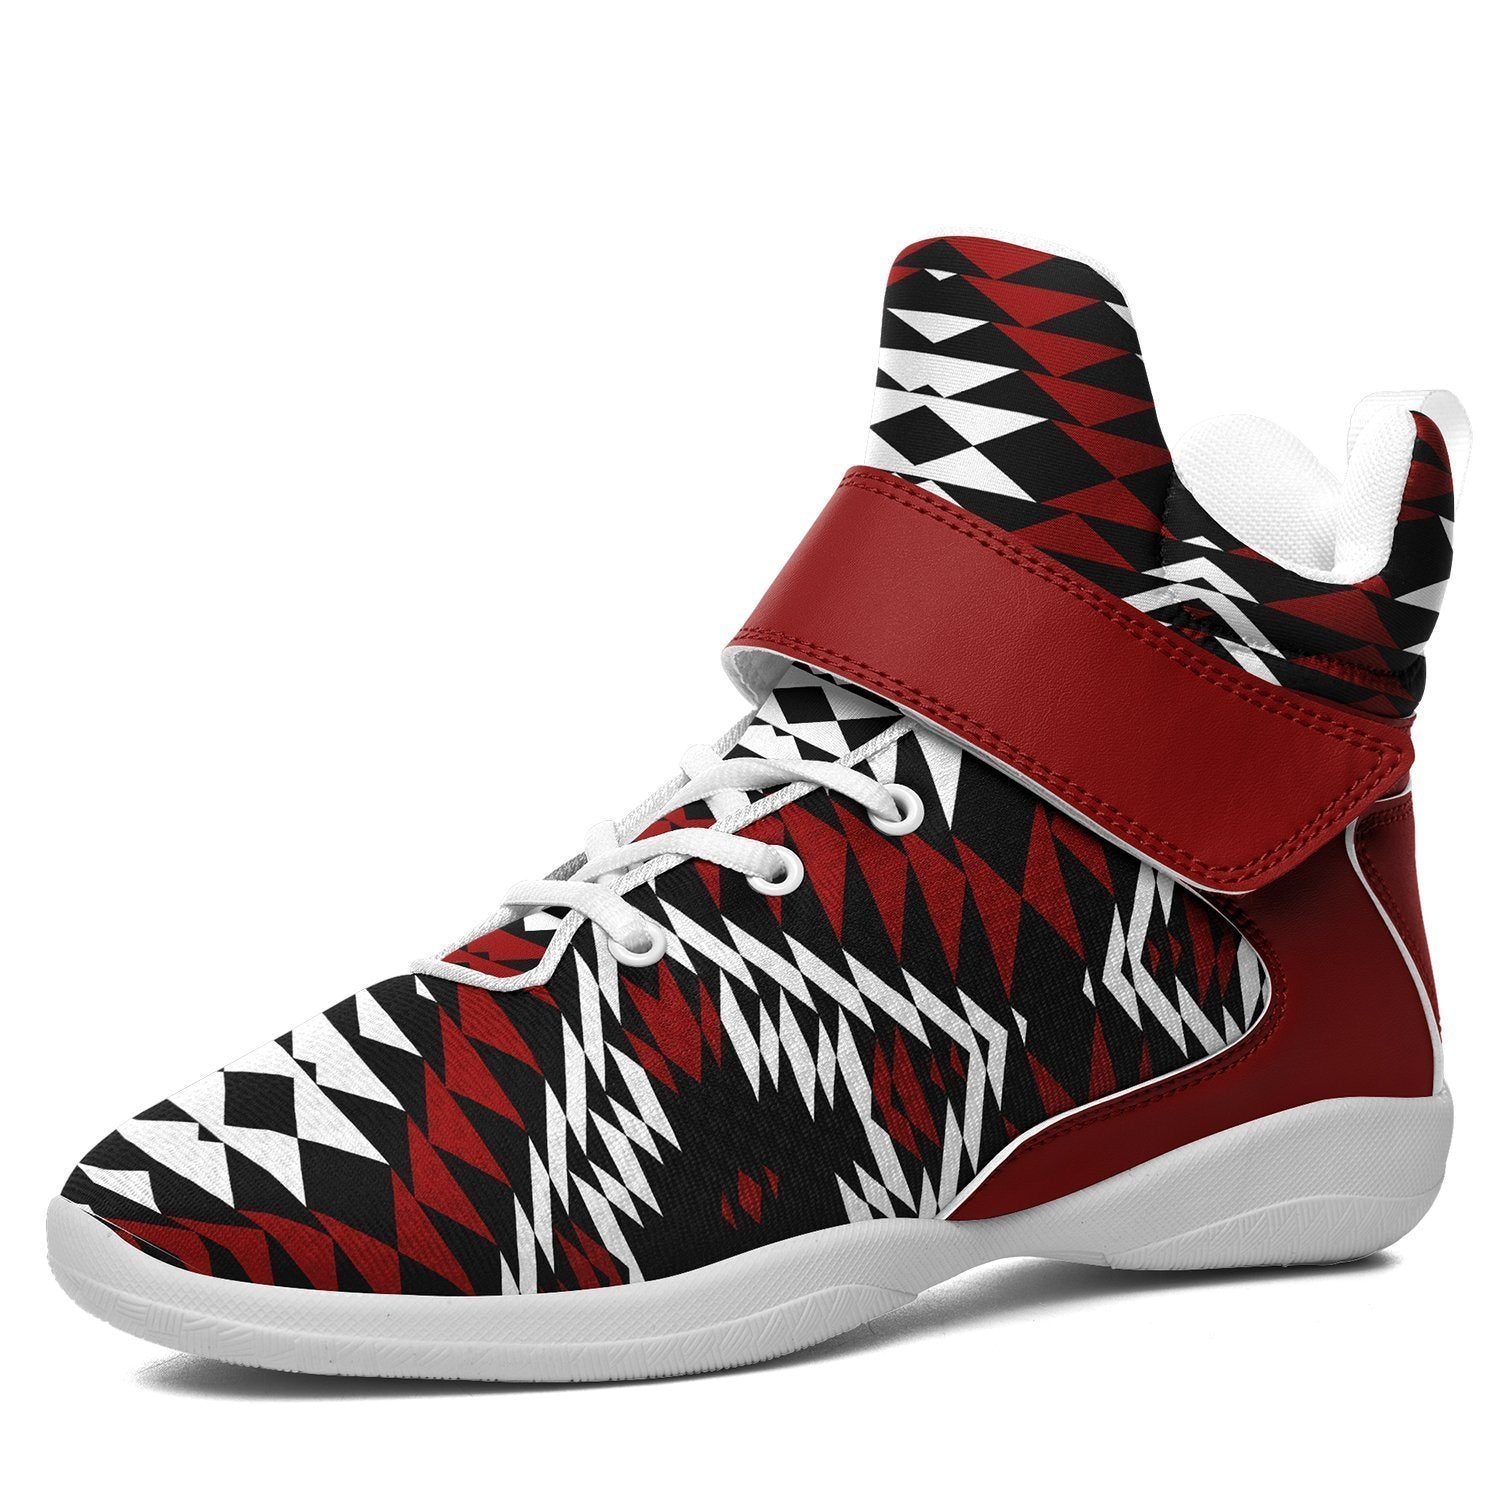 Taos Wool Ipottaa Basketball / Sport High Top Shoes - White Sole 49 Dzine US Men 7 / EUR 40 White Sole with Dark Red Strap 